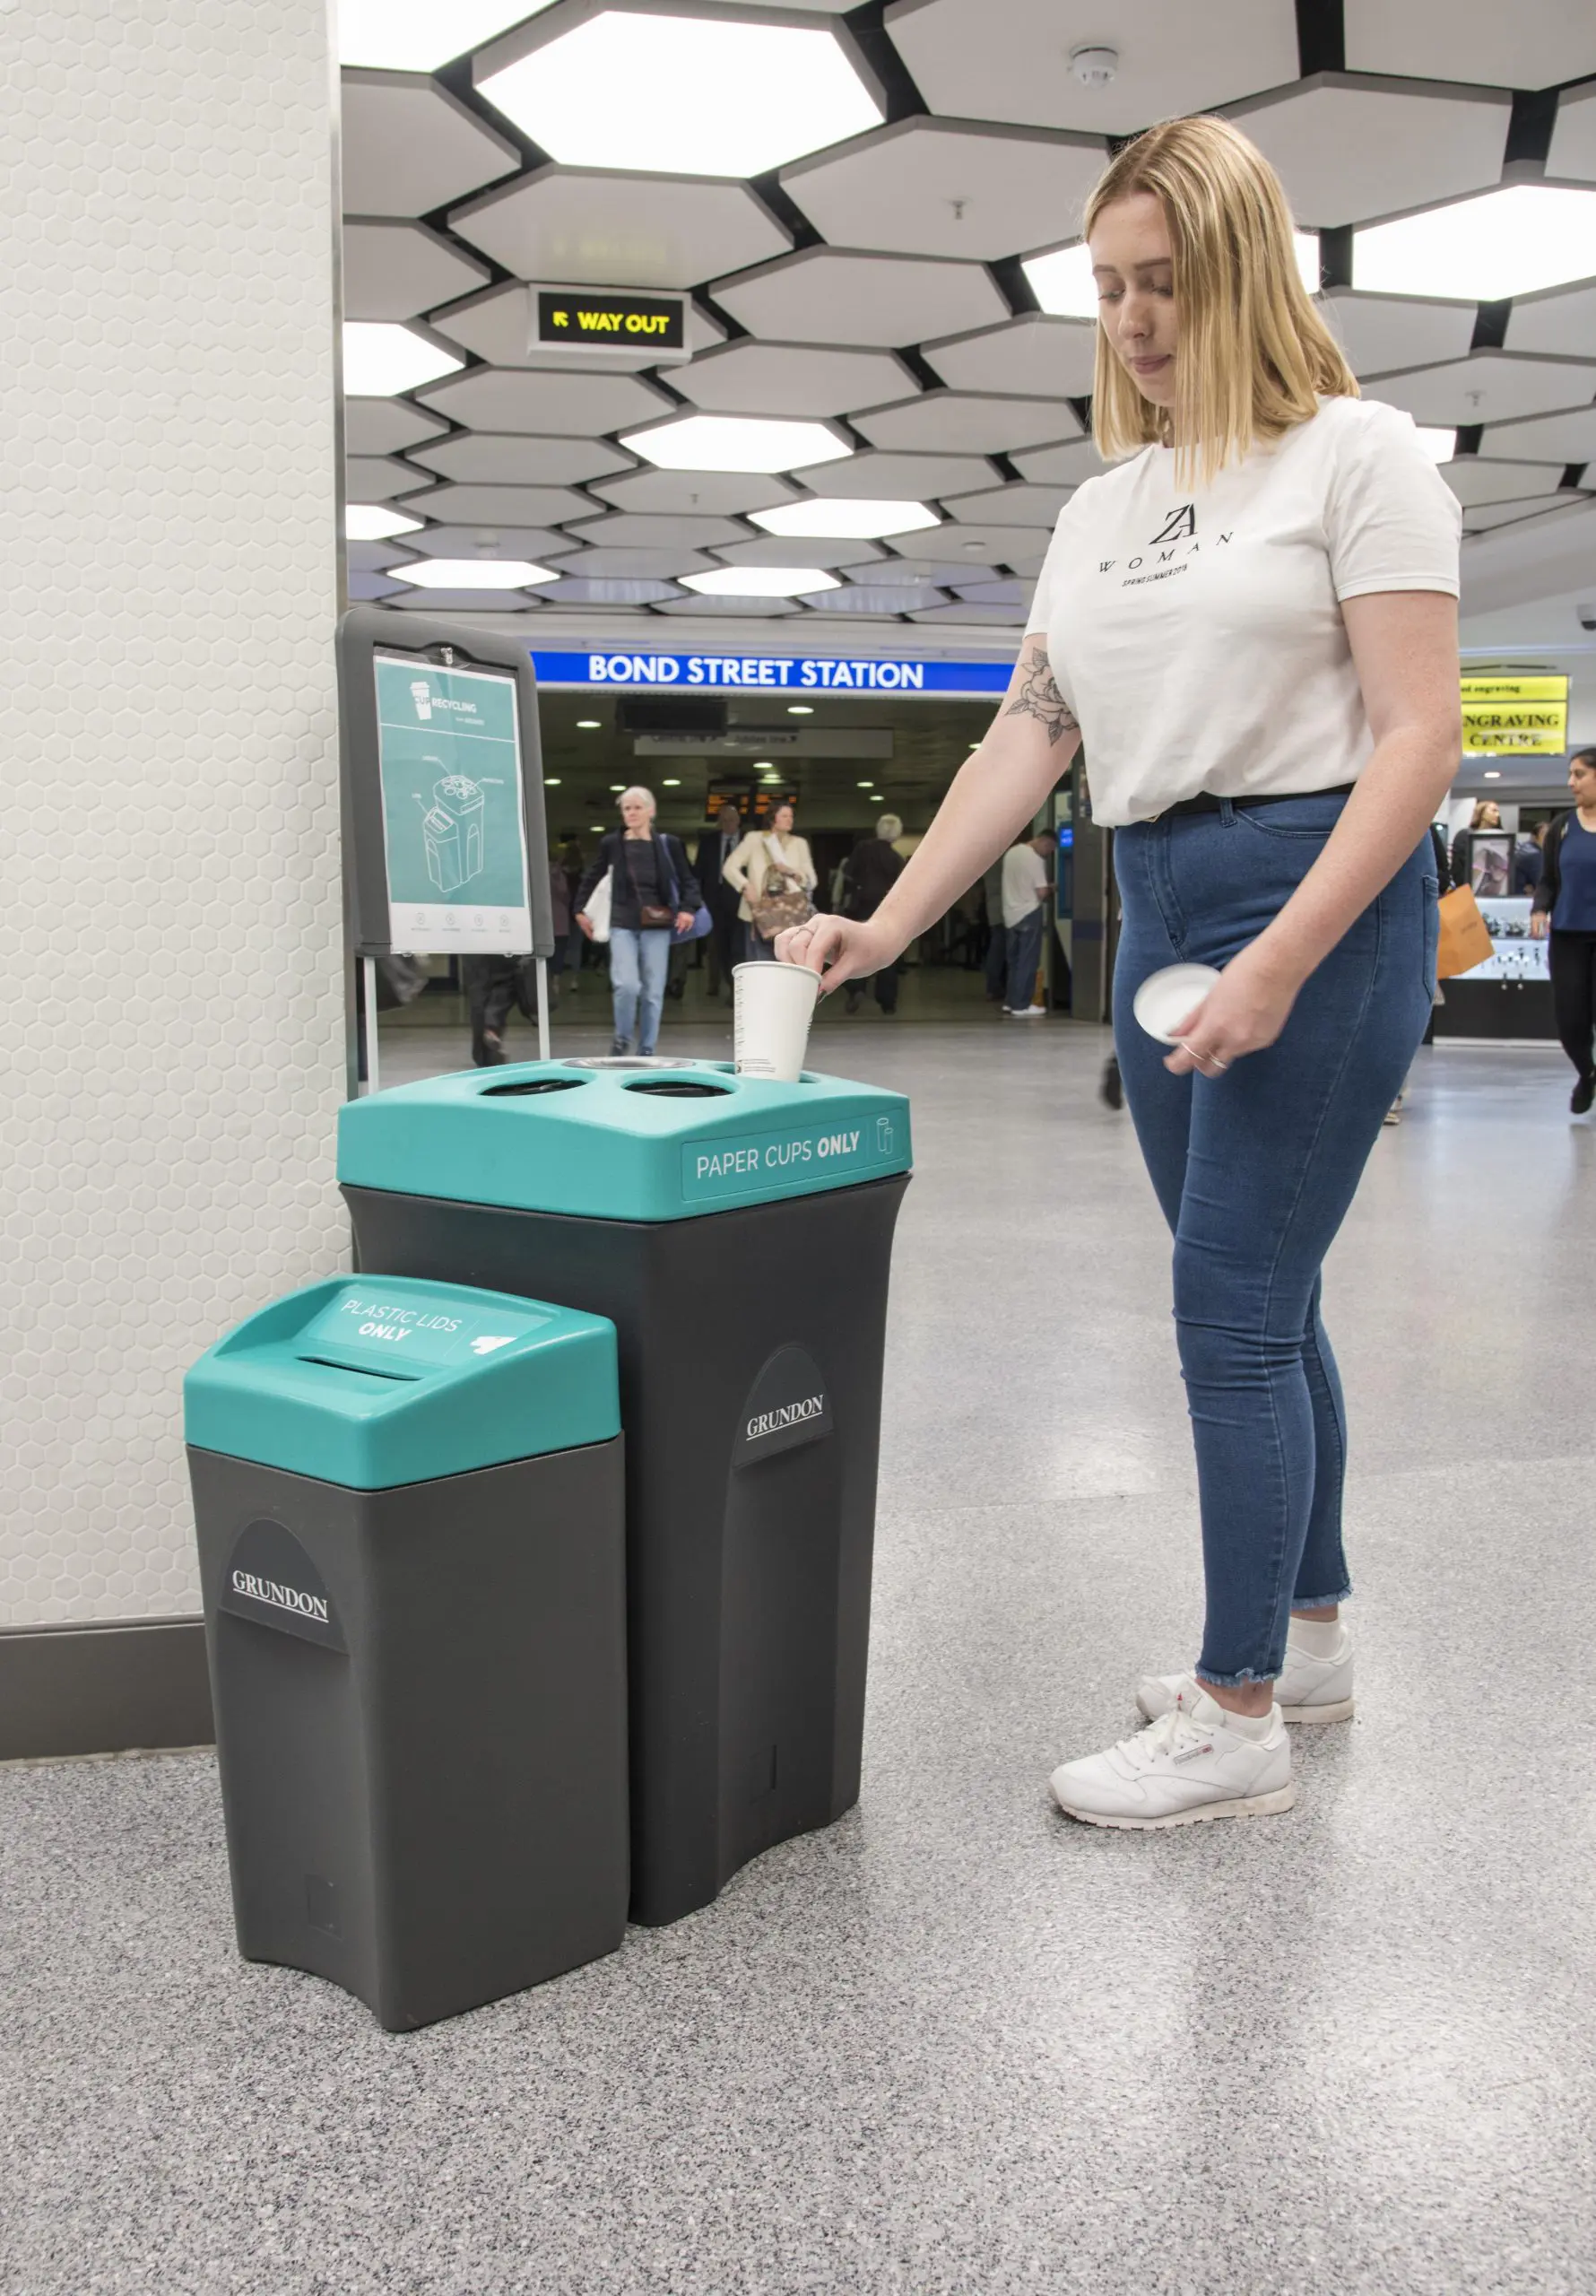 Grundon's specialist colour-coded cup recycling bins aid segregation